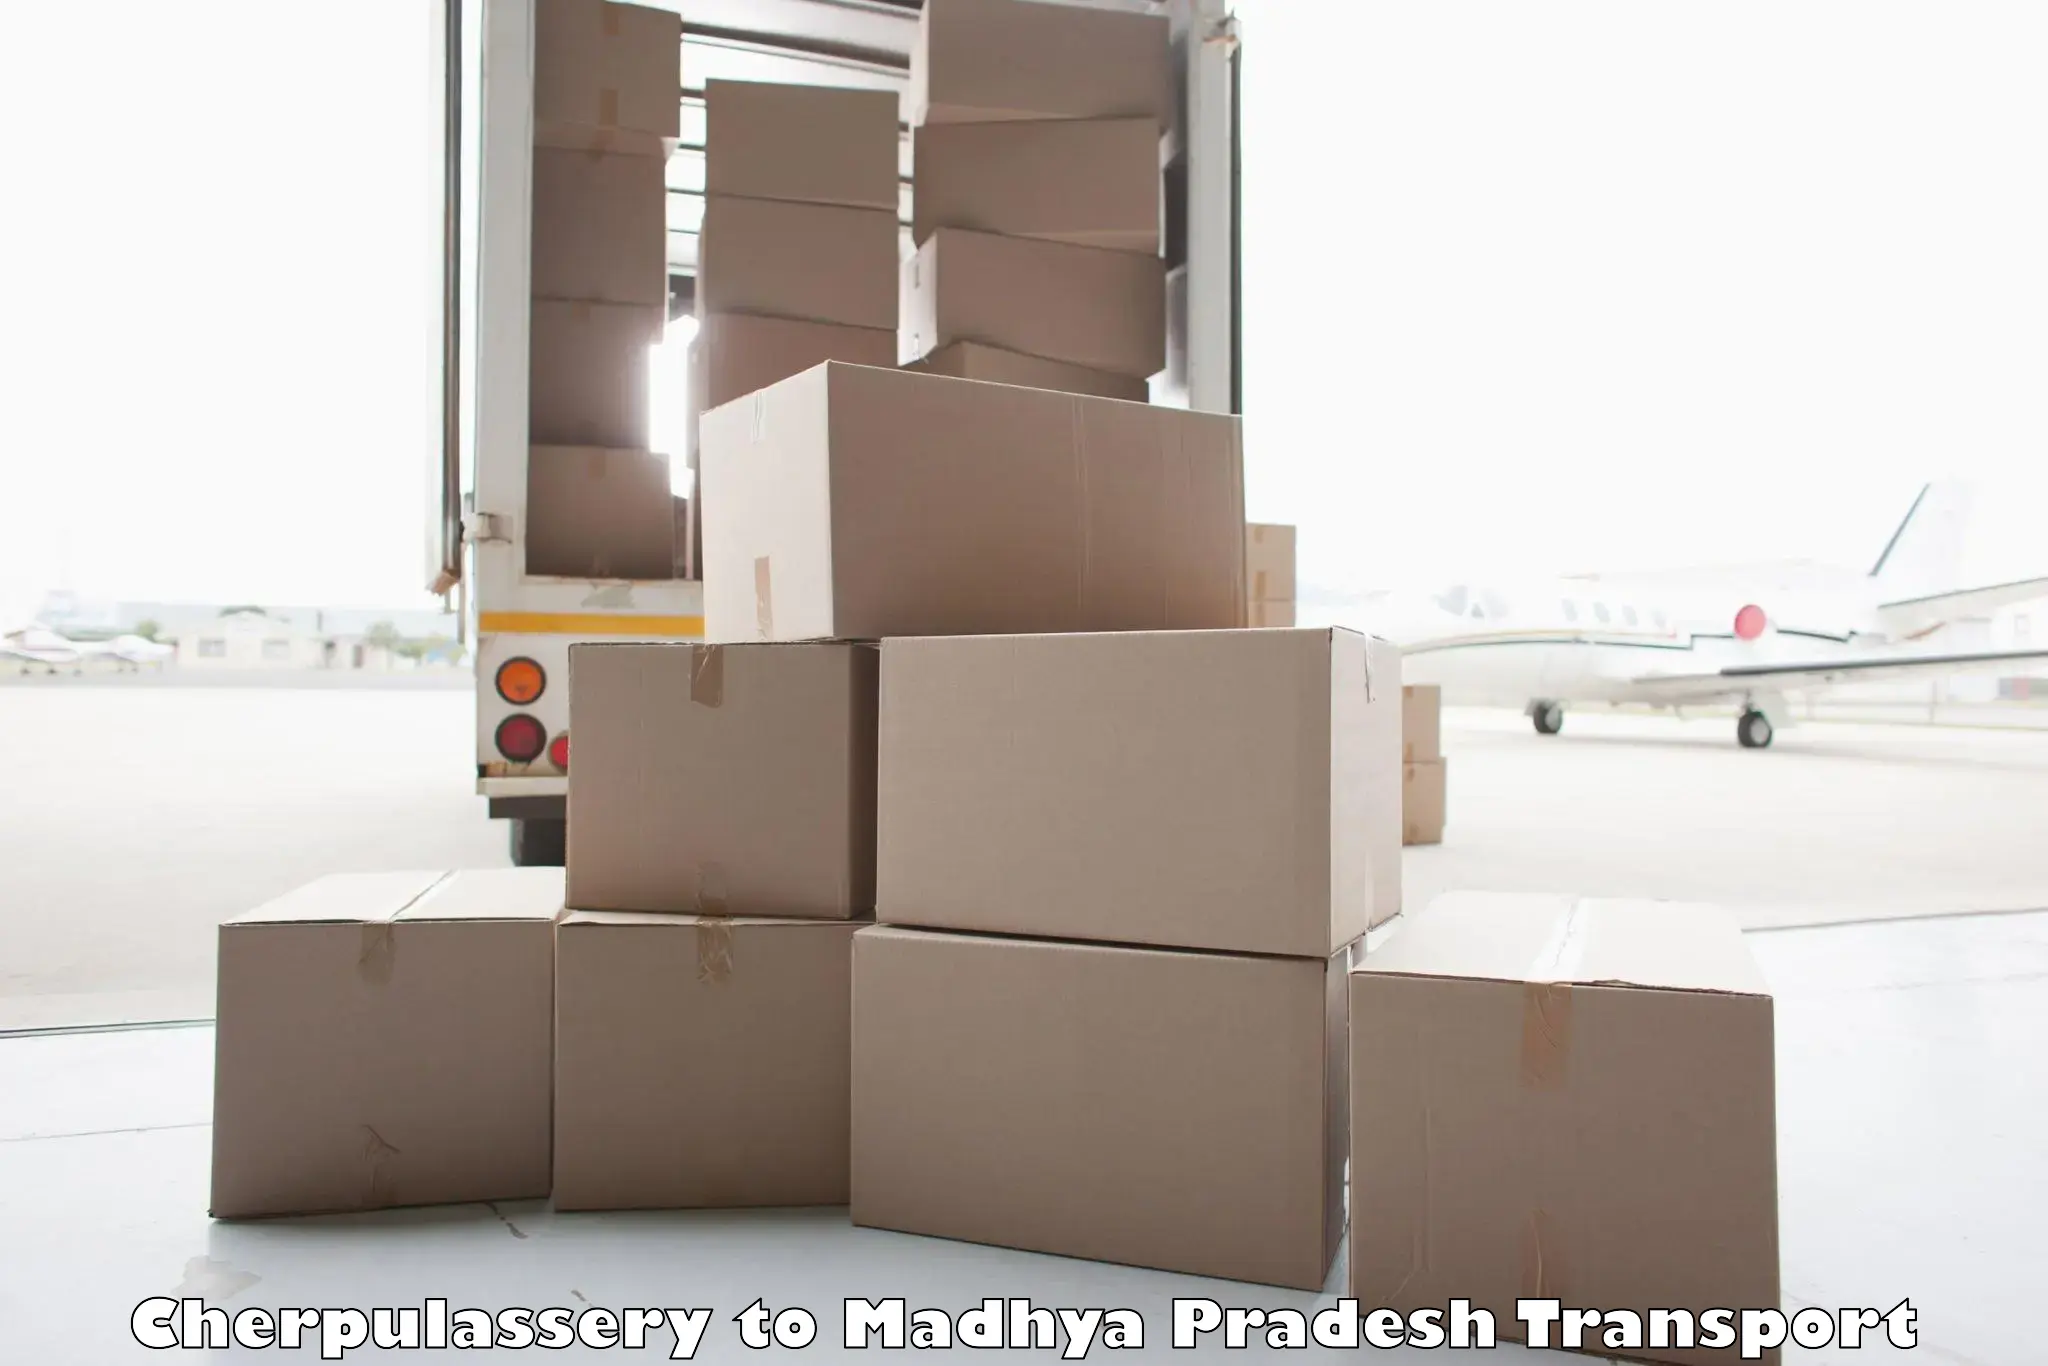 Nationwide transport services Cherpulassery to Bhopal